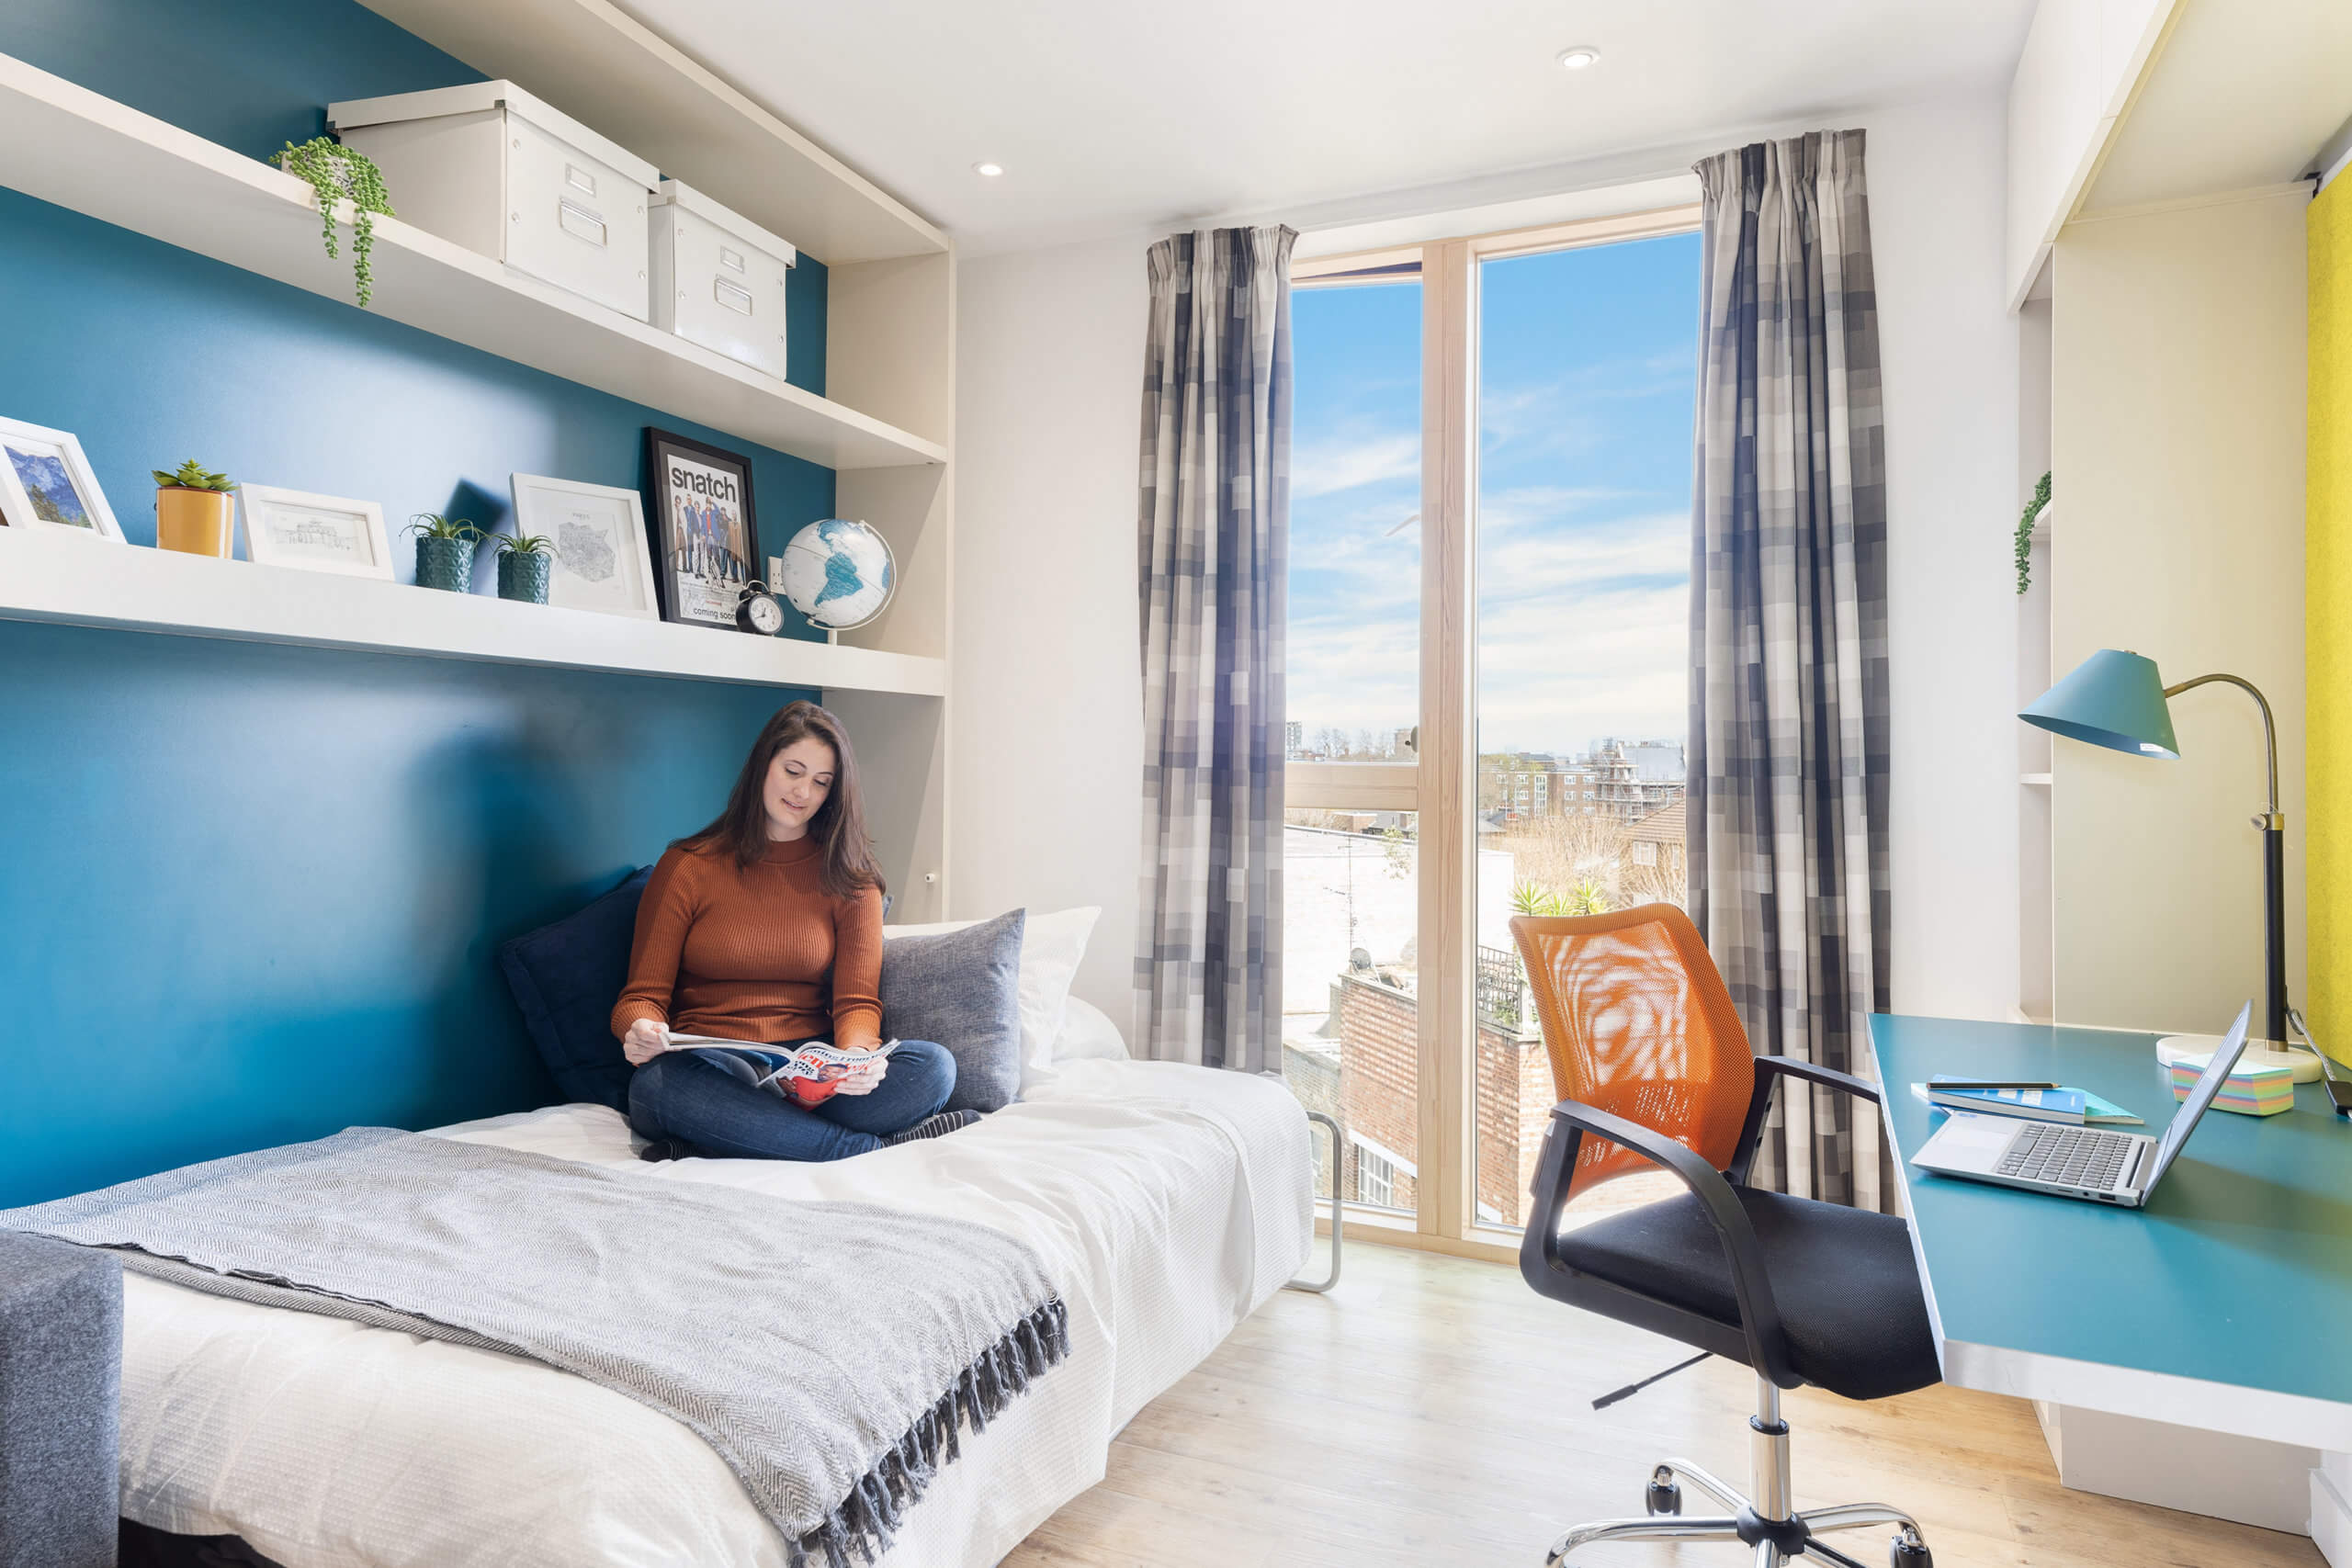 Young woman sat on bed reading in student accommodation Hoxton